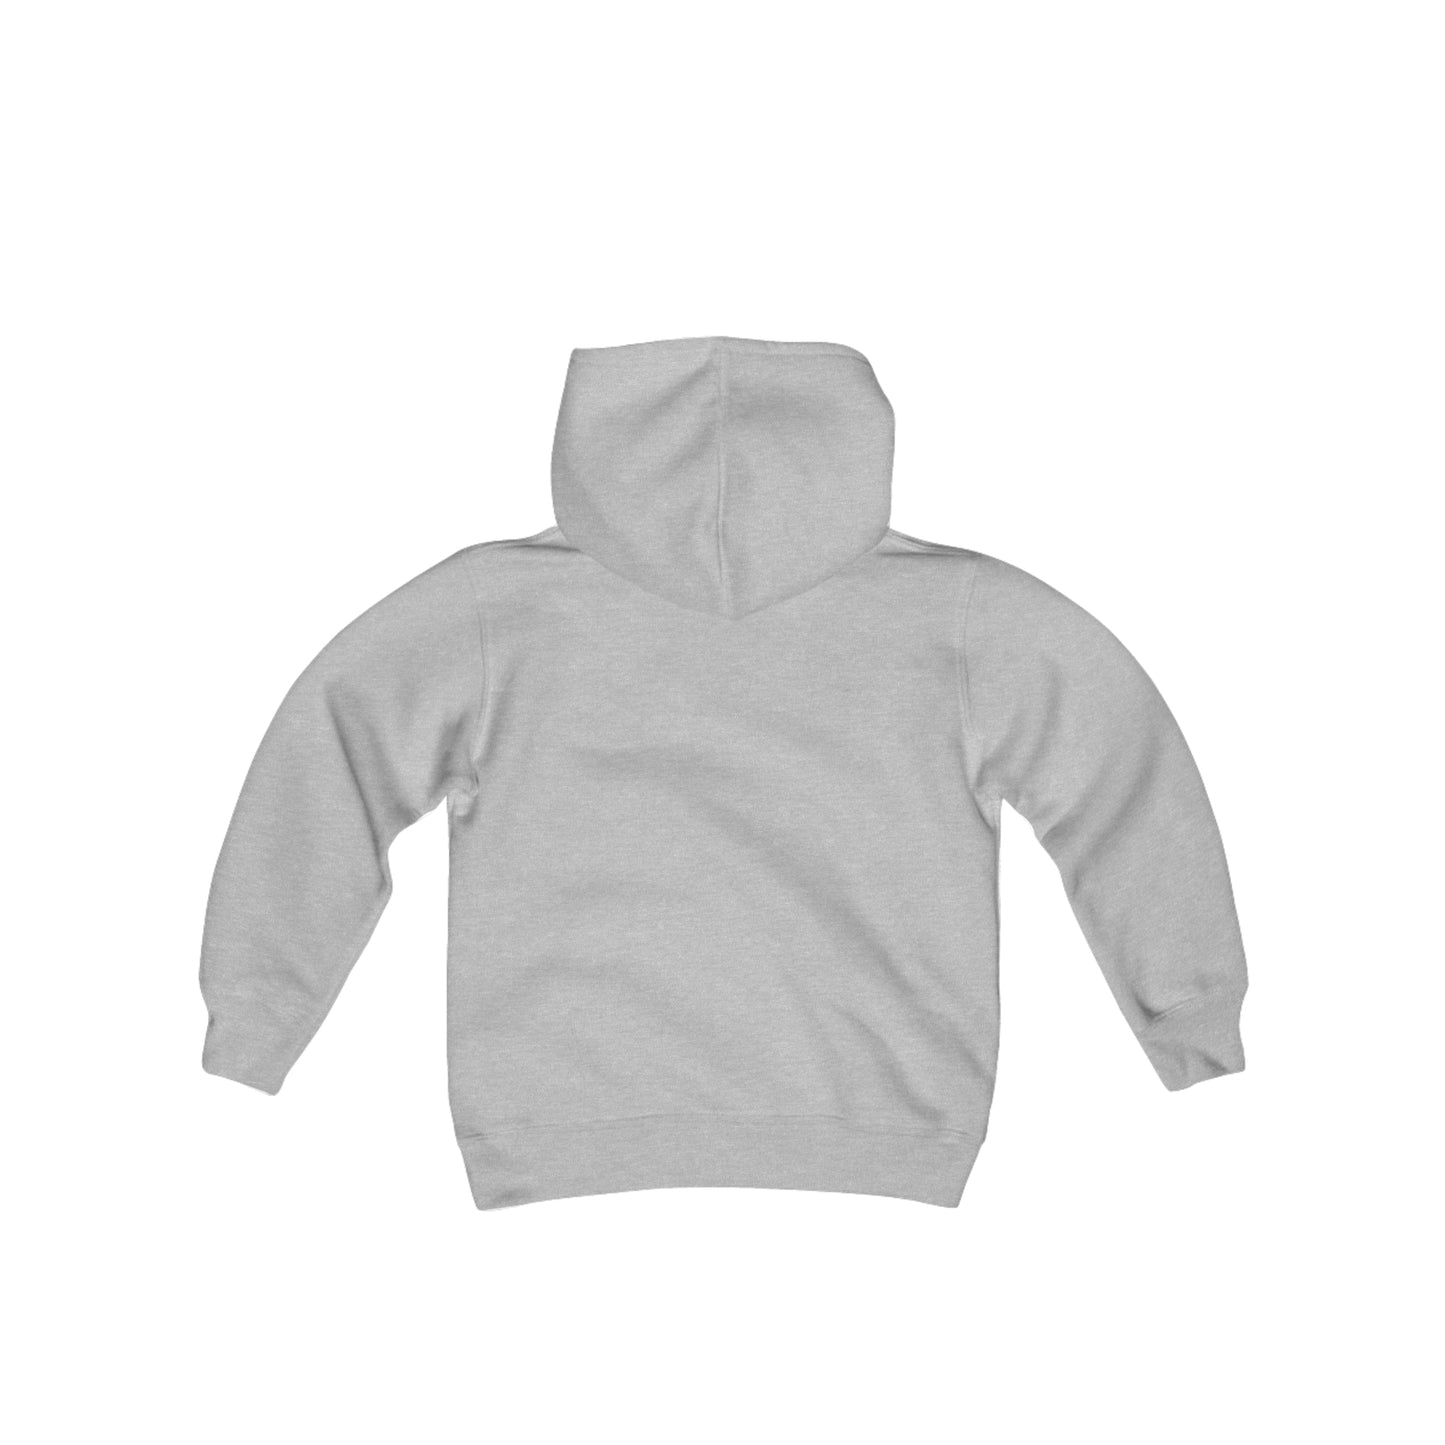 Youth Hooded Sweatshirt - Ballerina With Butterfly Wings